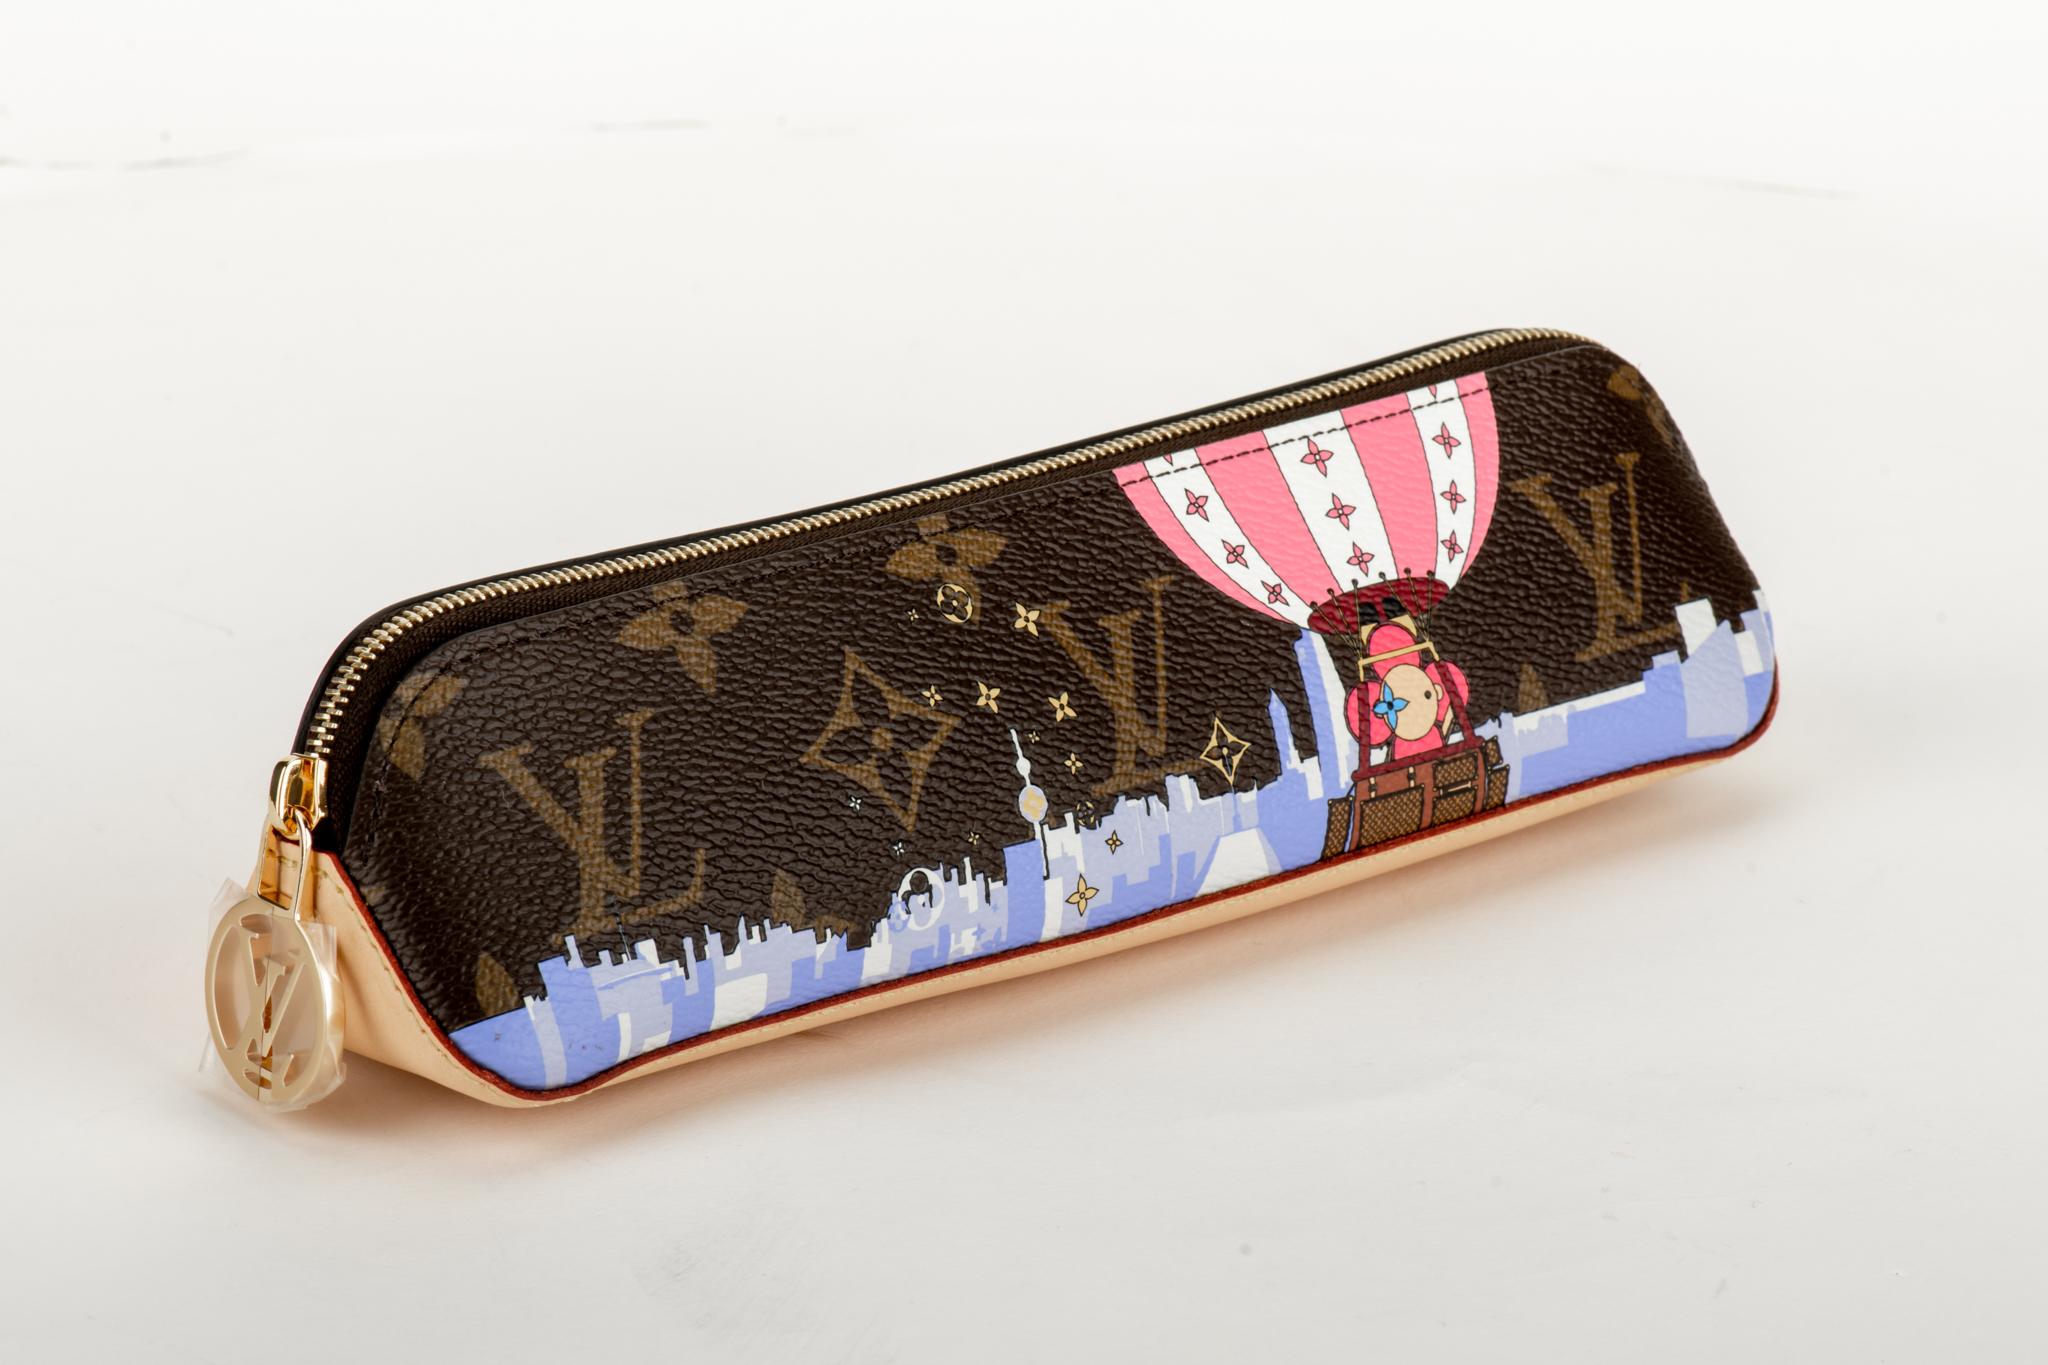 Vuitton Christmas 2019 limited edition Shanghai pencil pouch. Brand new in box with dust cover.